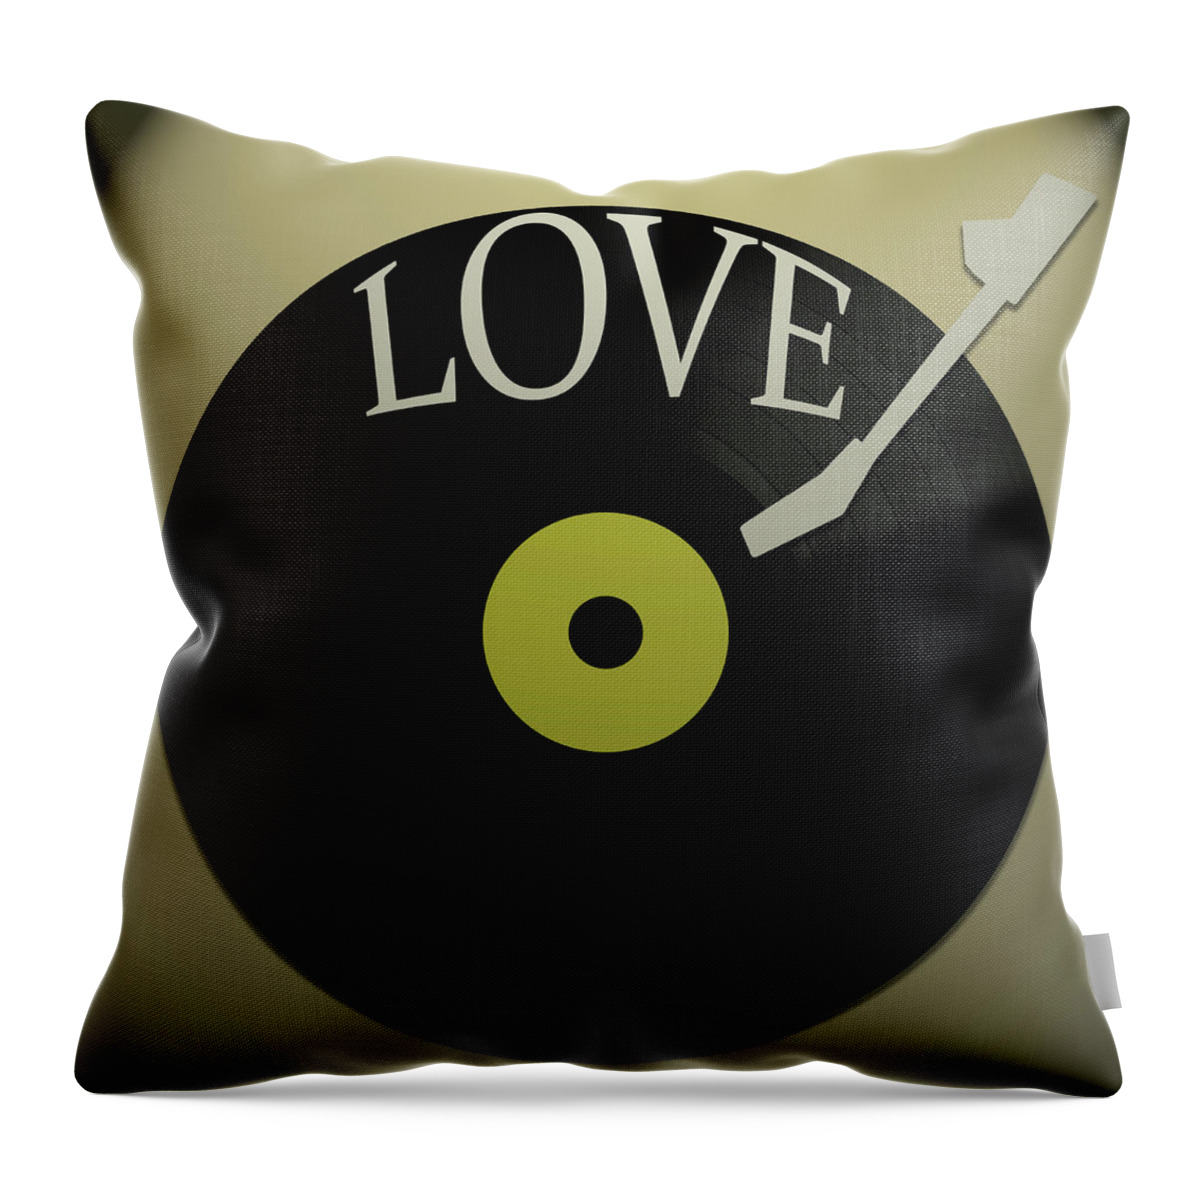 Love Music Vinyl Throw Pillow featuring the mixed media Love Music Vinyl by Dan Sproul